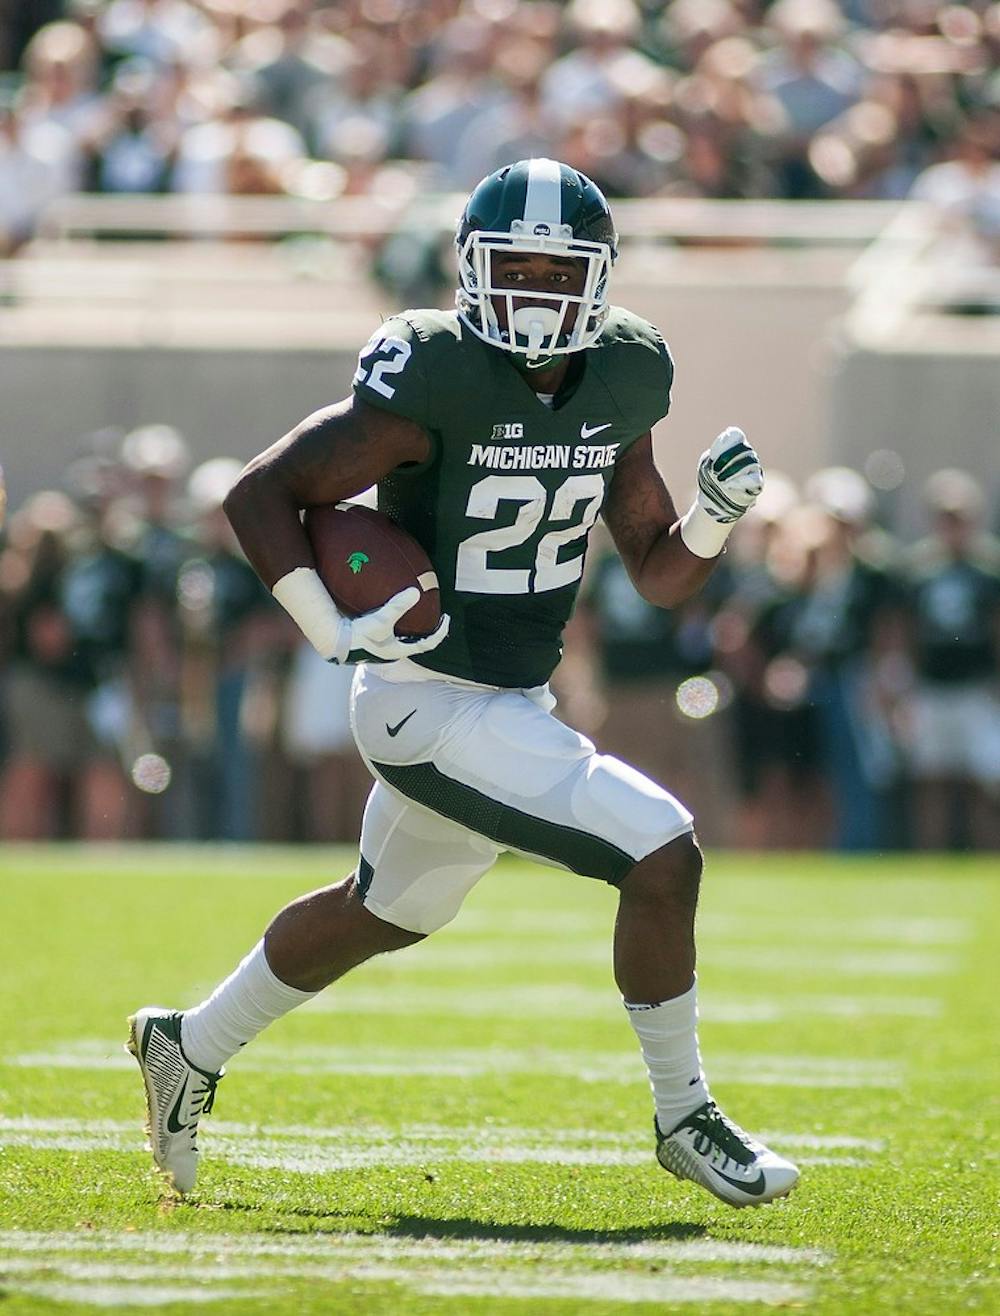 <p>Sophomore running back Delton Williams runs down the field during the game against Wyoming on Sept. 27, 2014, at Spartan Stadium. The Spartans defeated the Cowboys, 56-14. Raymond Williams/The State News</p>